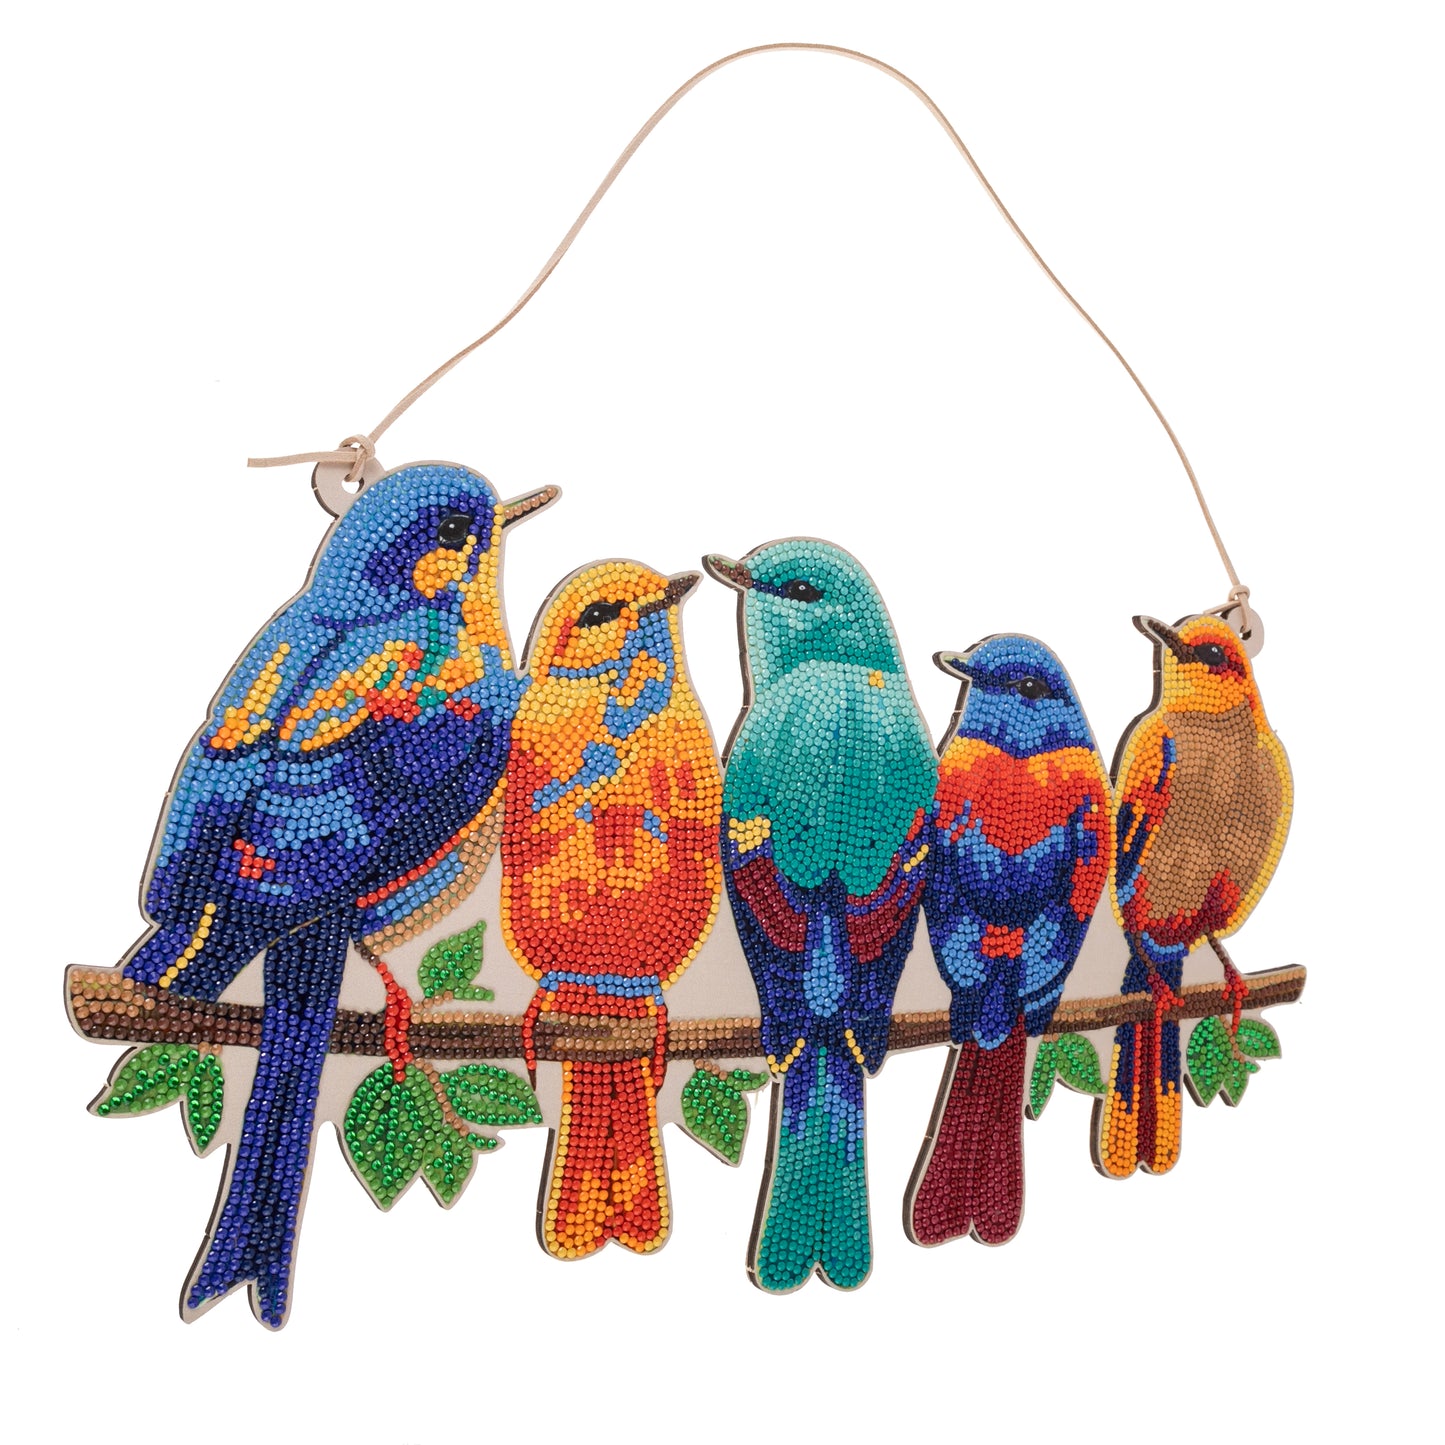 Crystal art hanging wall decoration mdf songbirds angled